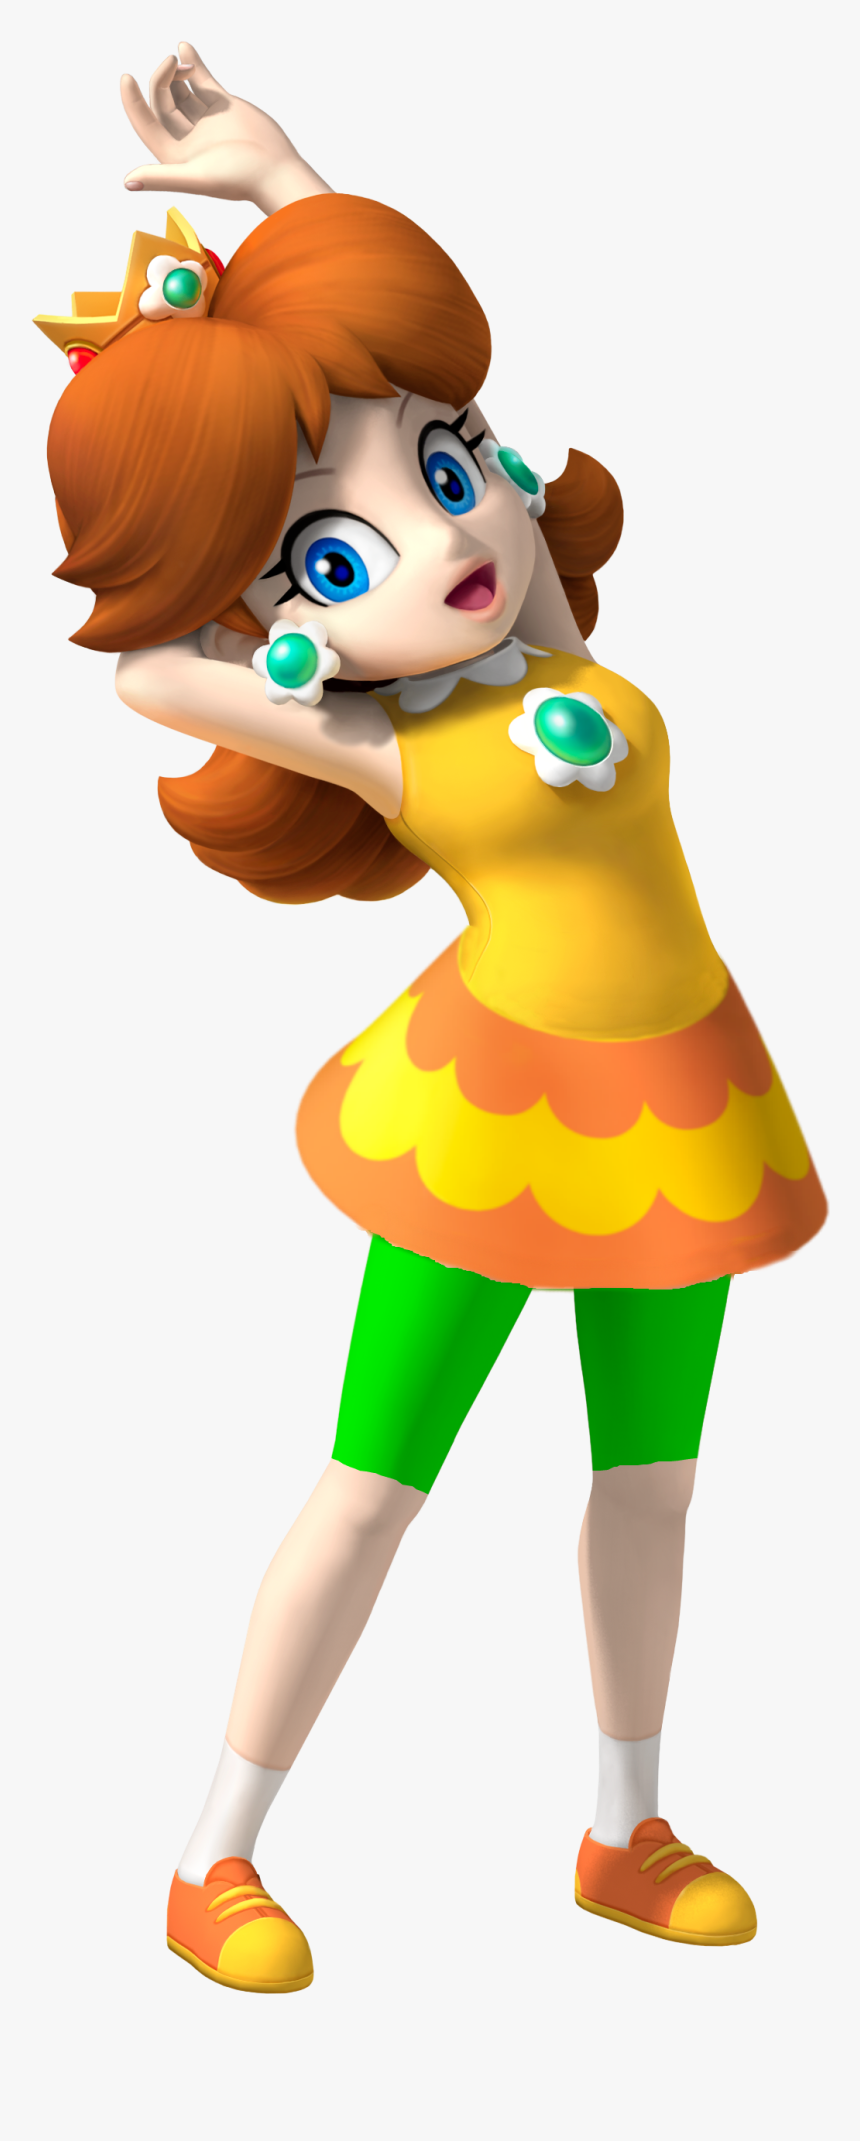 Princess Daisy Png - Princess Daisy Sports Outfit, Transparent Png, Free Download